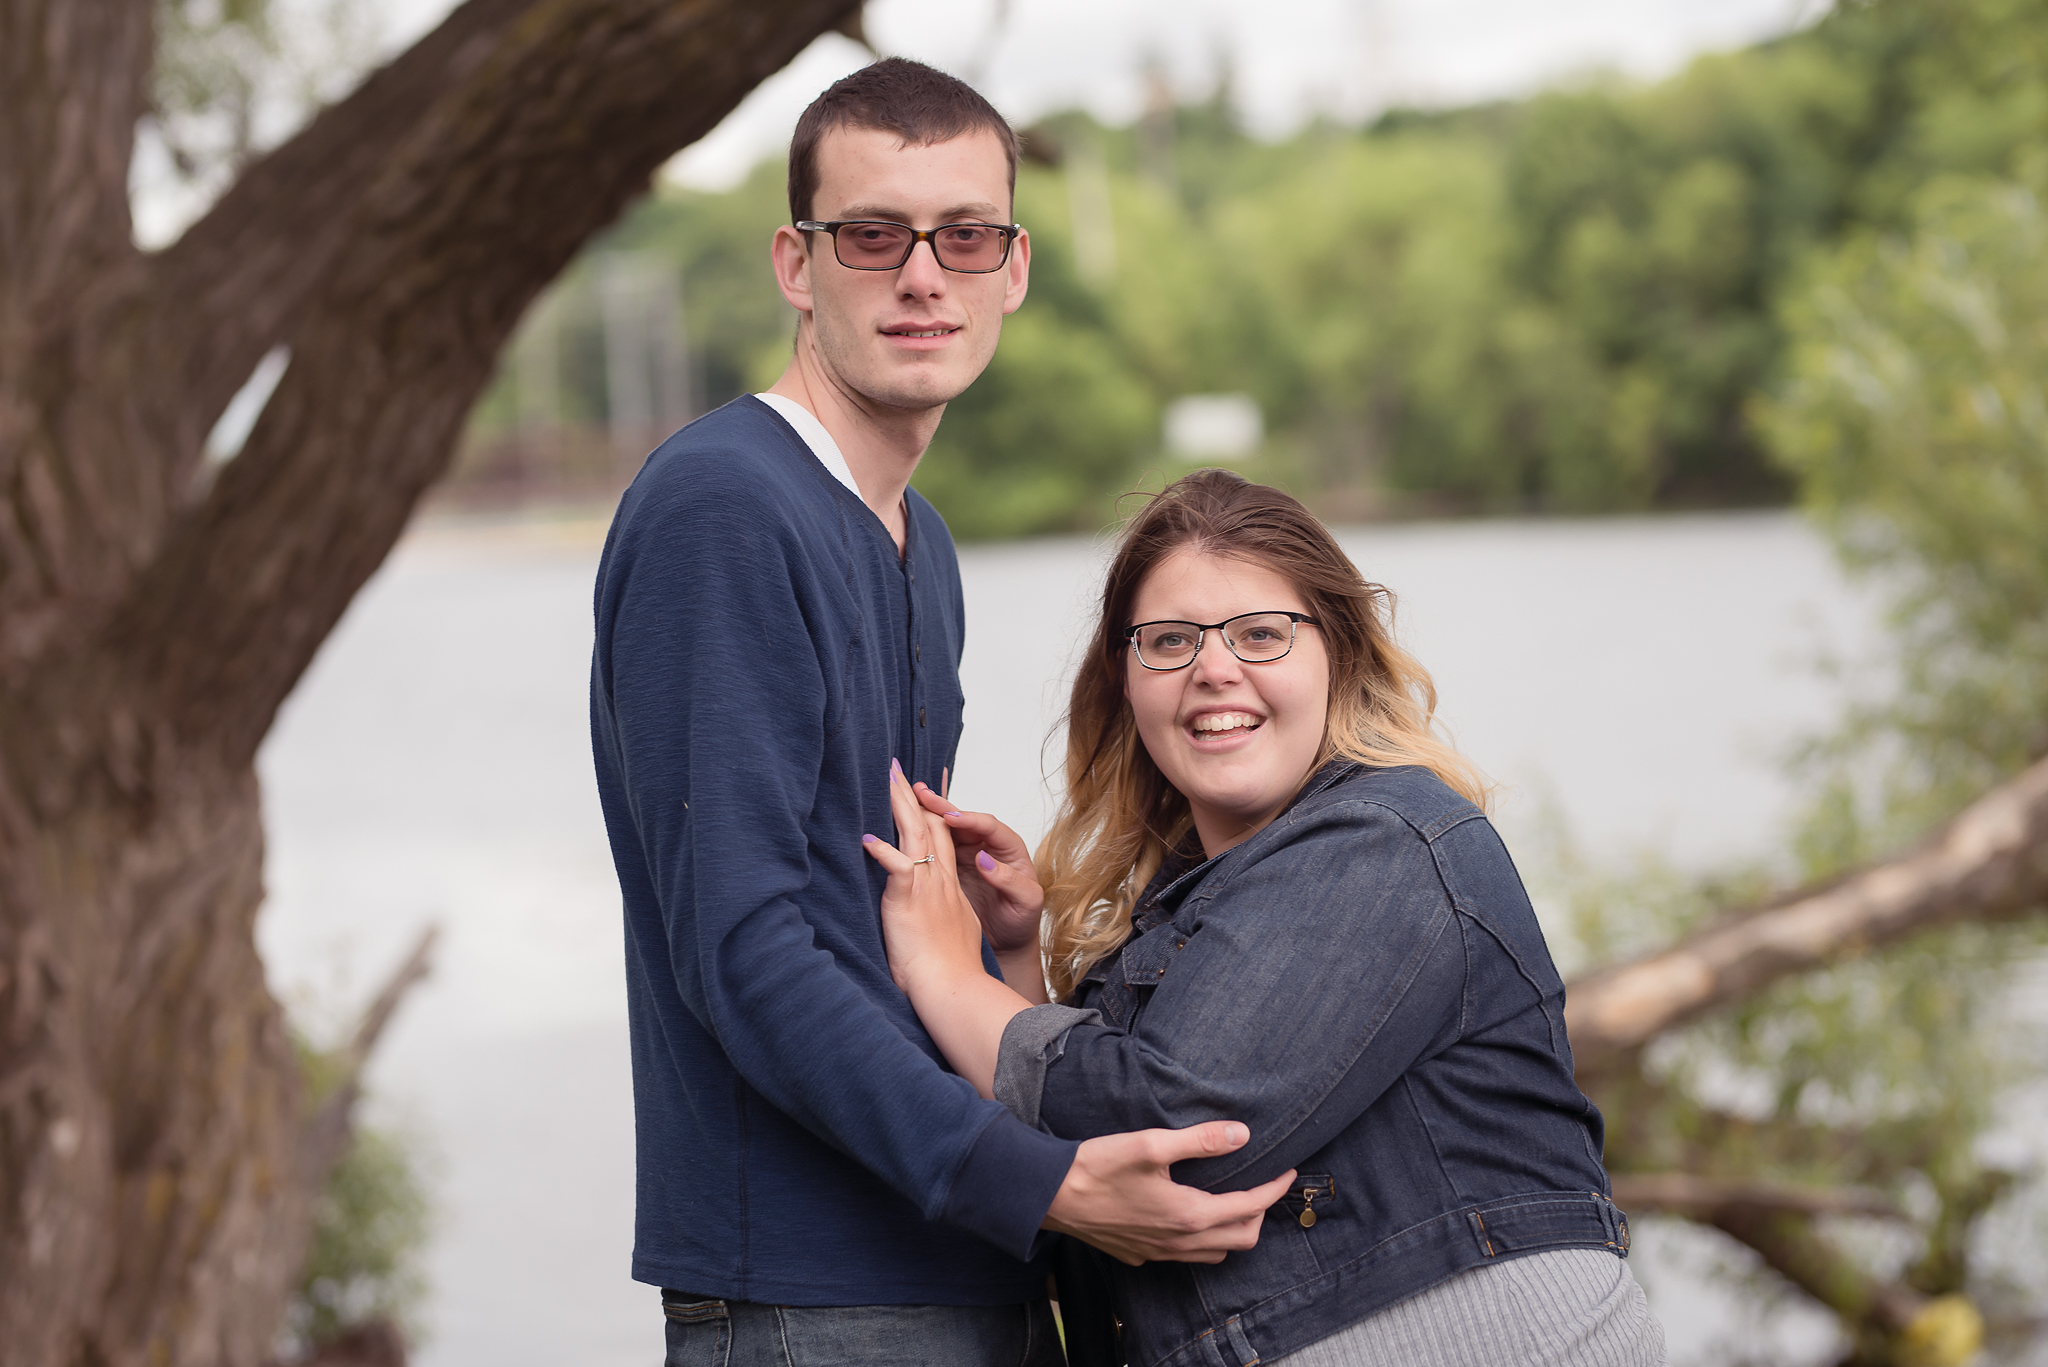 Couples516NaomiLuciennePhotography062018-Edit.jpg